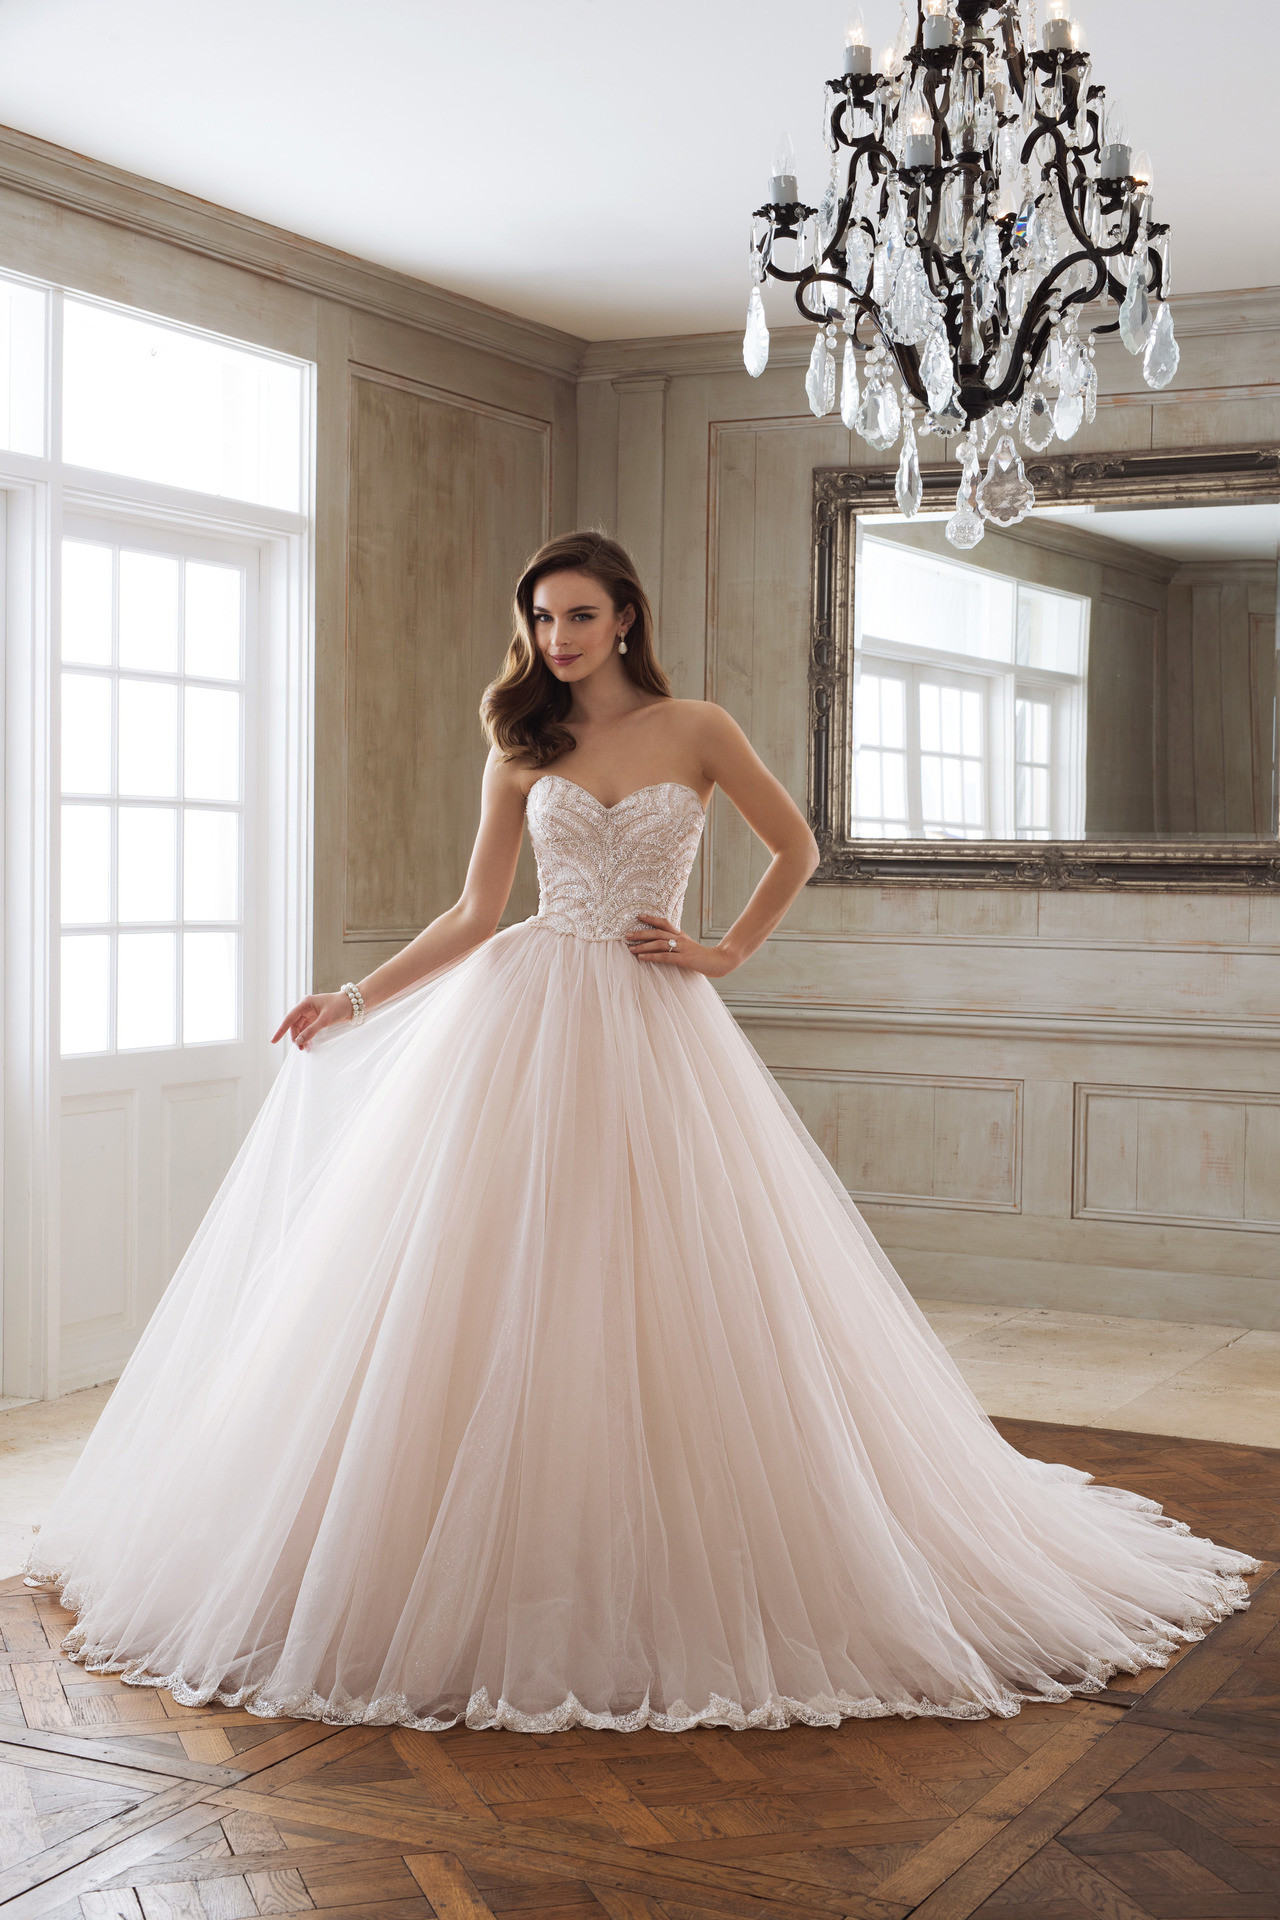 Pics Of Wedding Dresses
 Gown Collection Toronto Bridal Gown